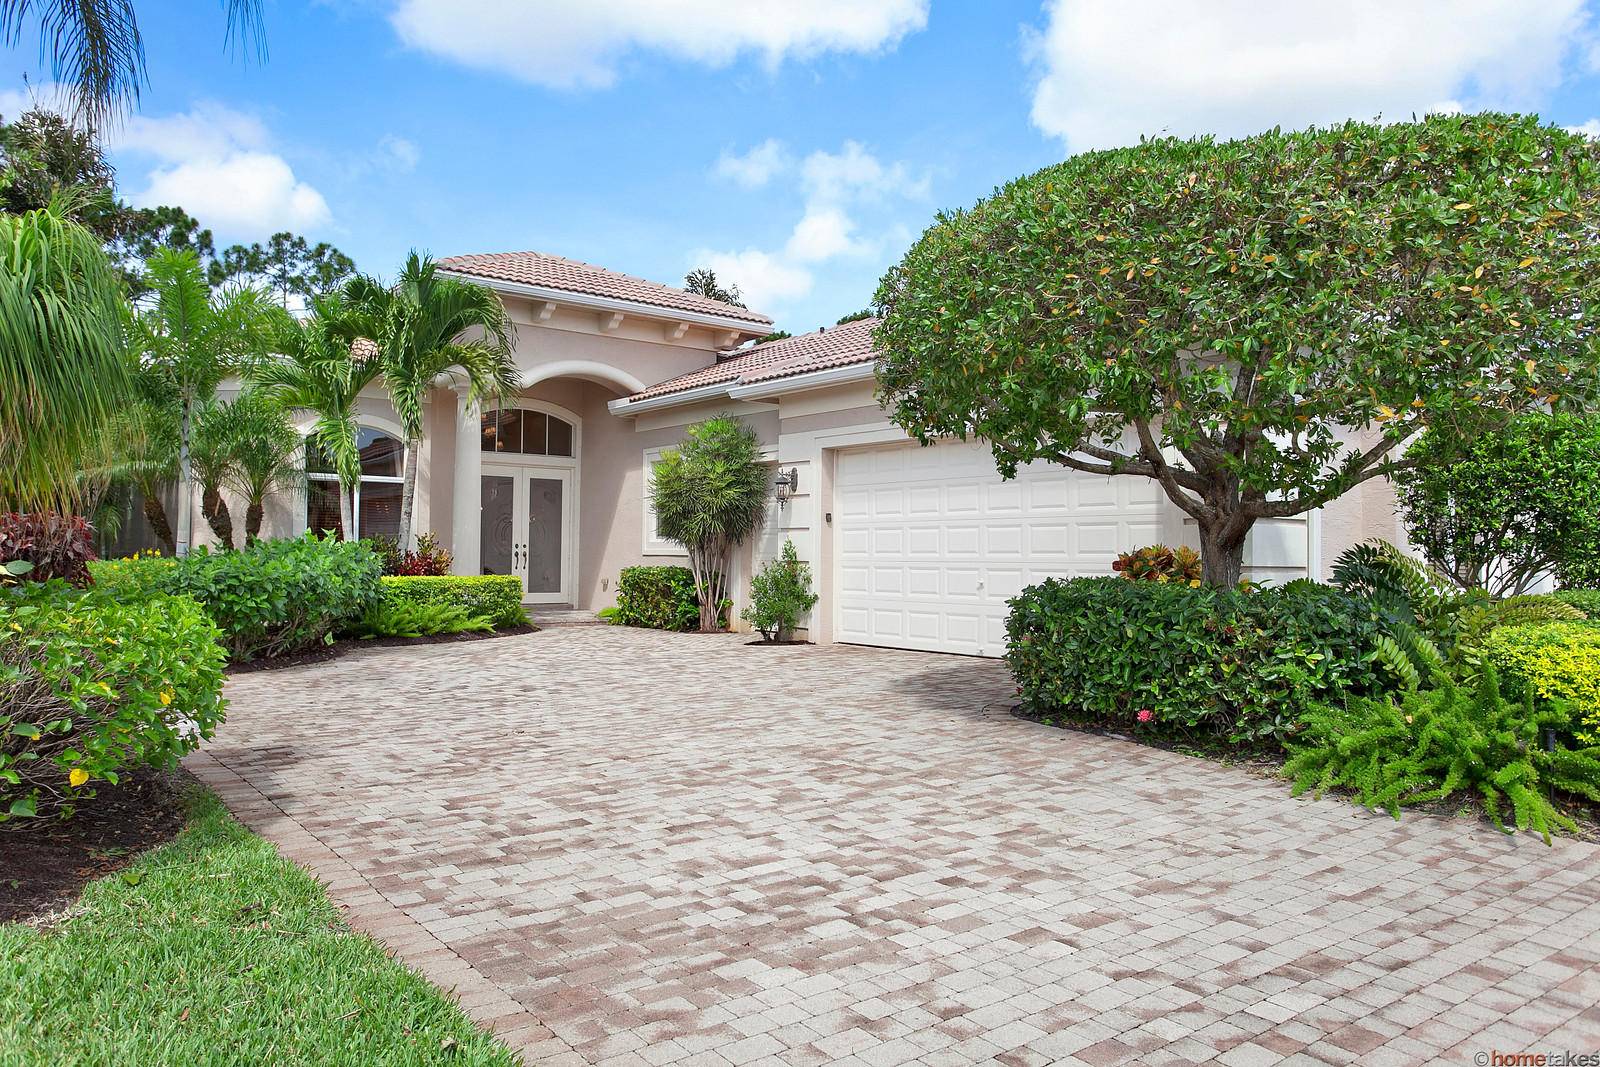 Well maintained Mirasol Country Club home with extremely private backyard.